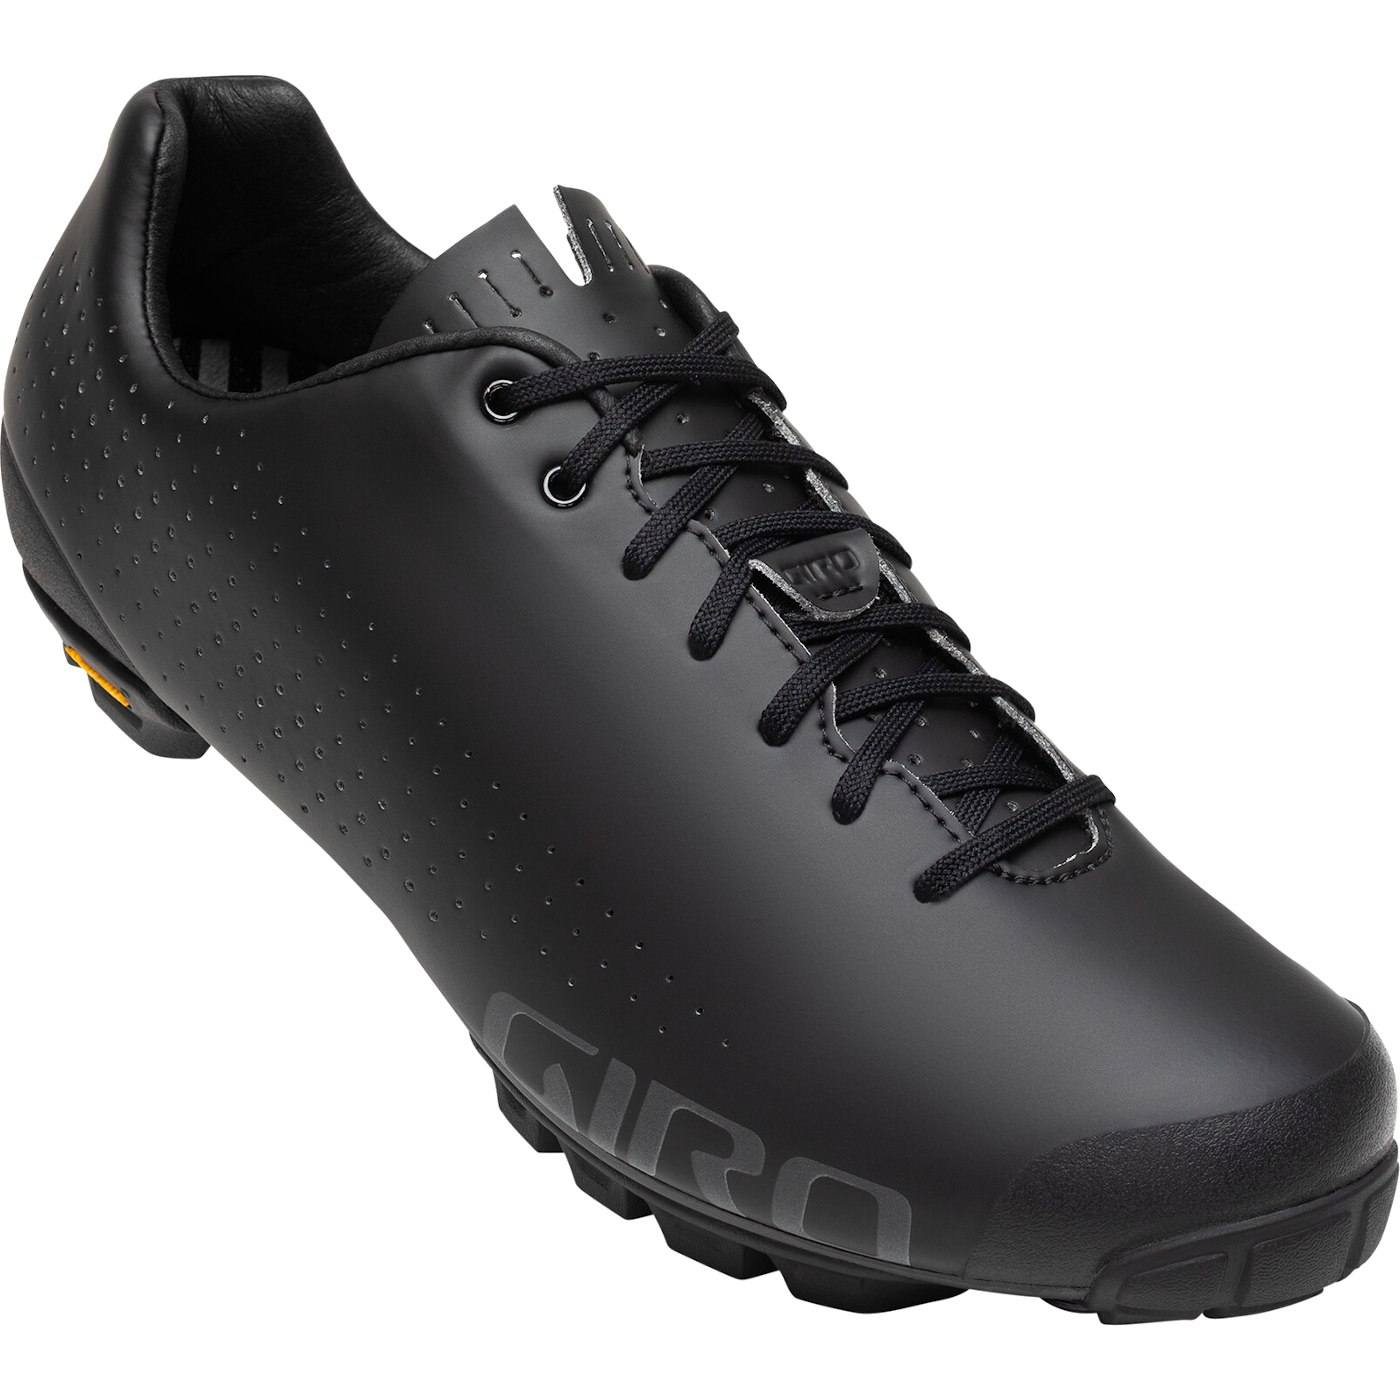 Picture of Giro Empire VR90 MTB Shoes - black